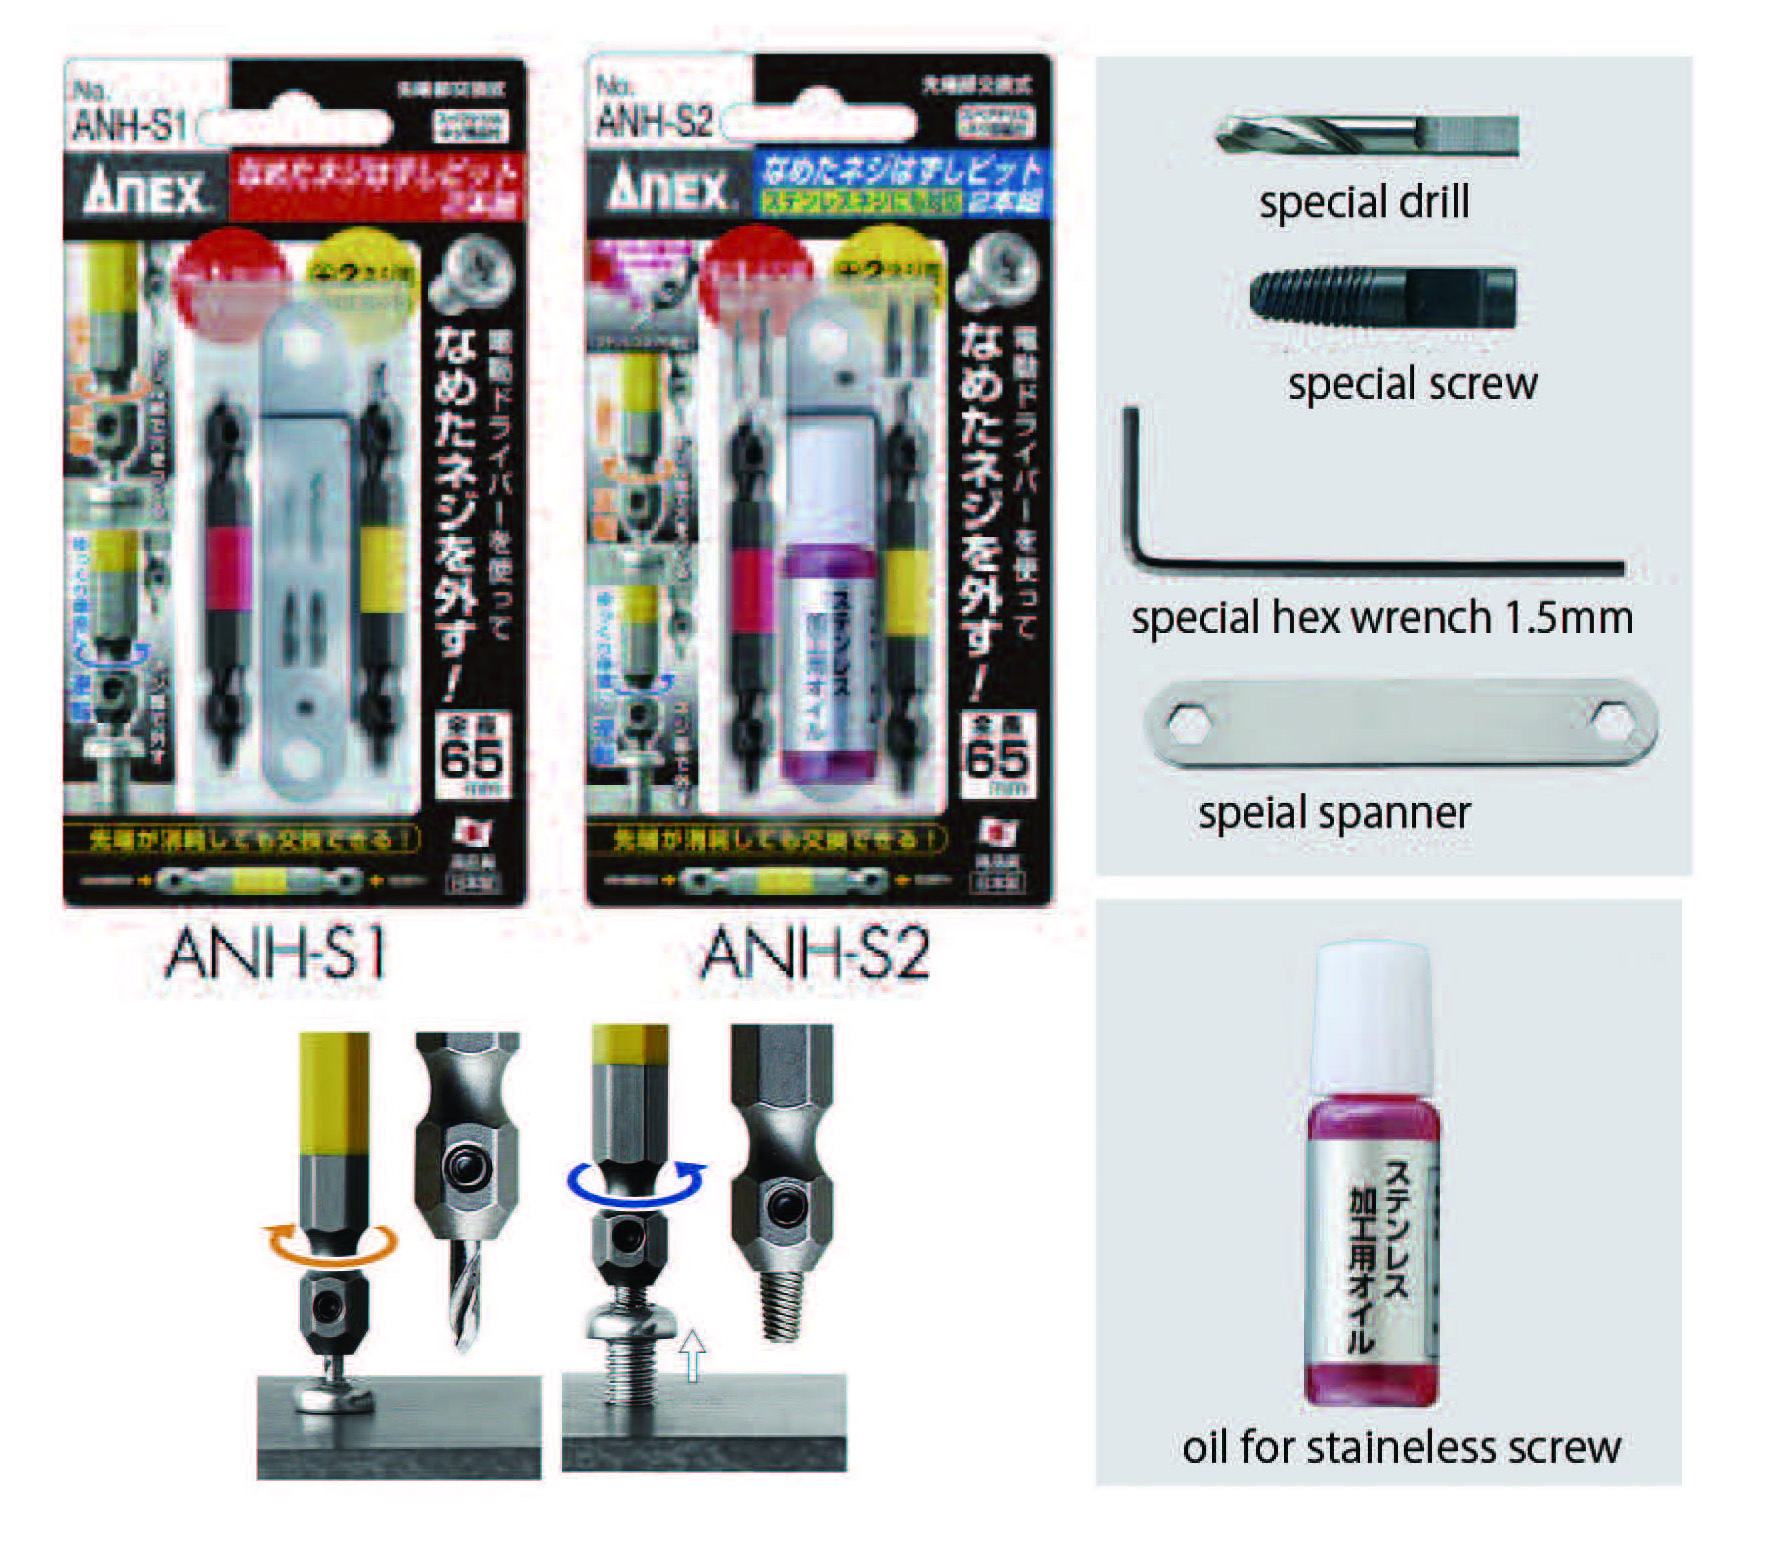 ANH-S1 & S2 ANEX Broken screw remover